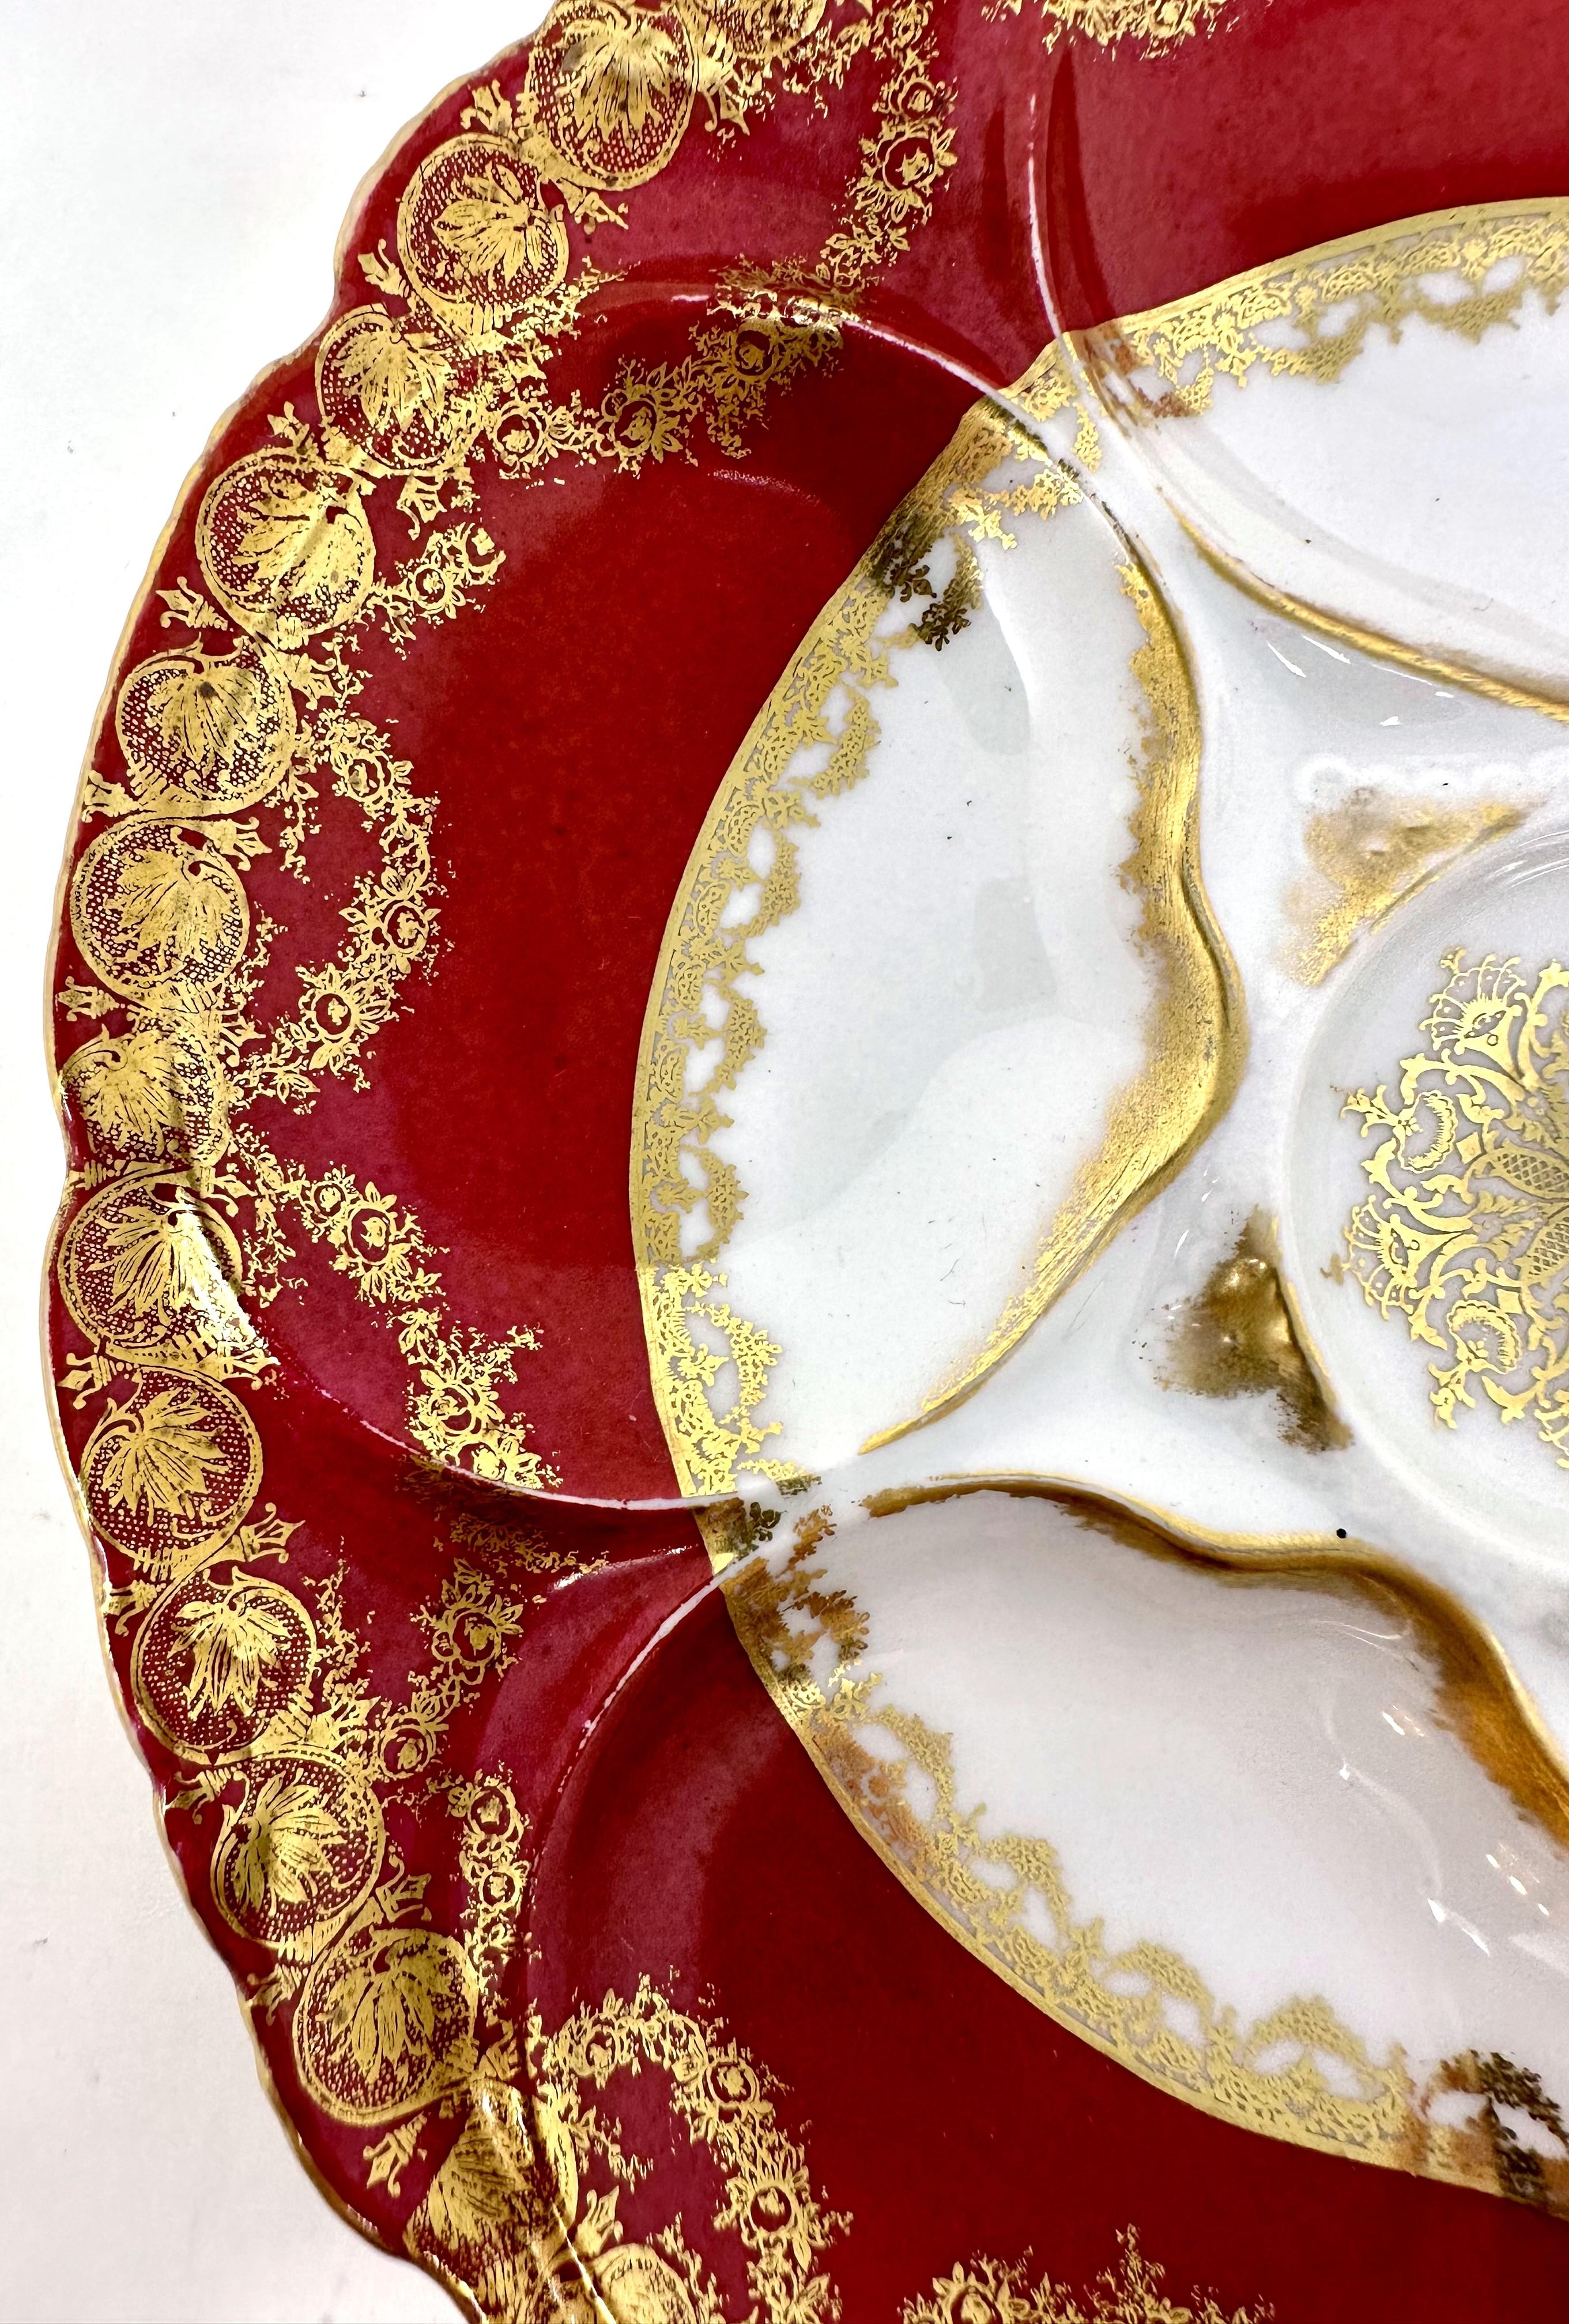 20th Century Antique French Haviland Limoges Red & Gold  Porcelain Oyster Plate, Circa 1900.